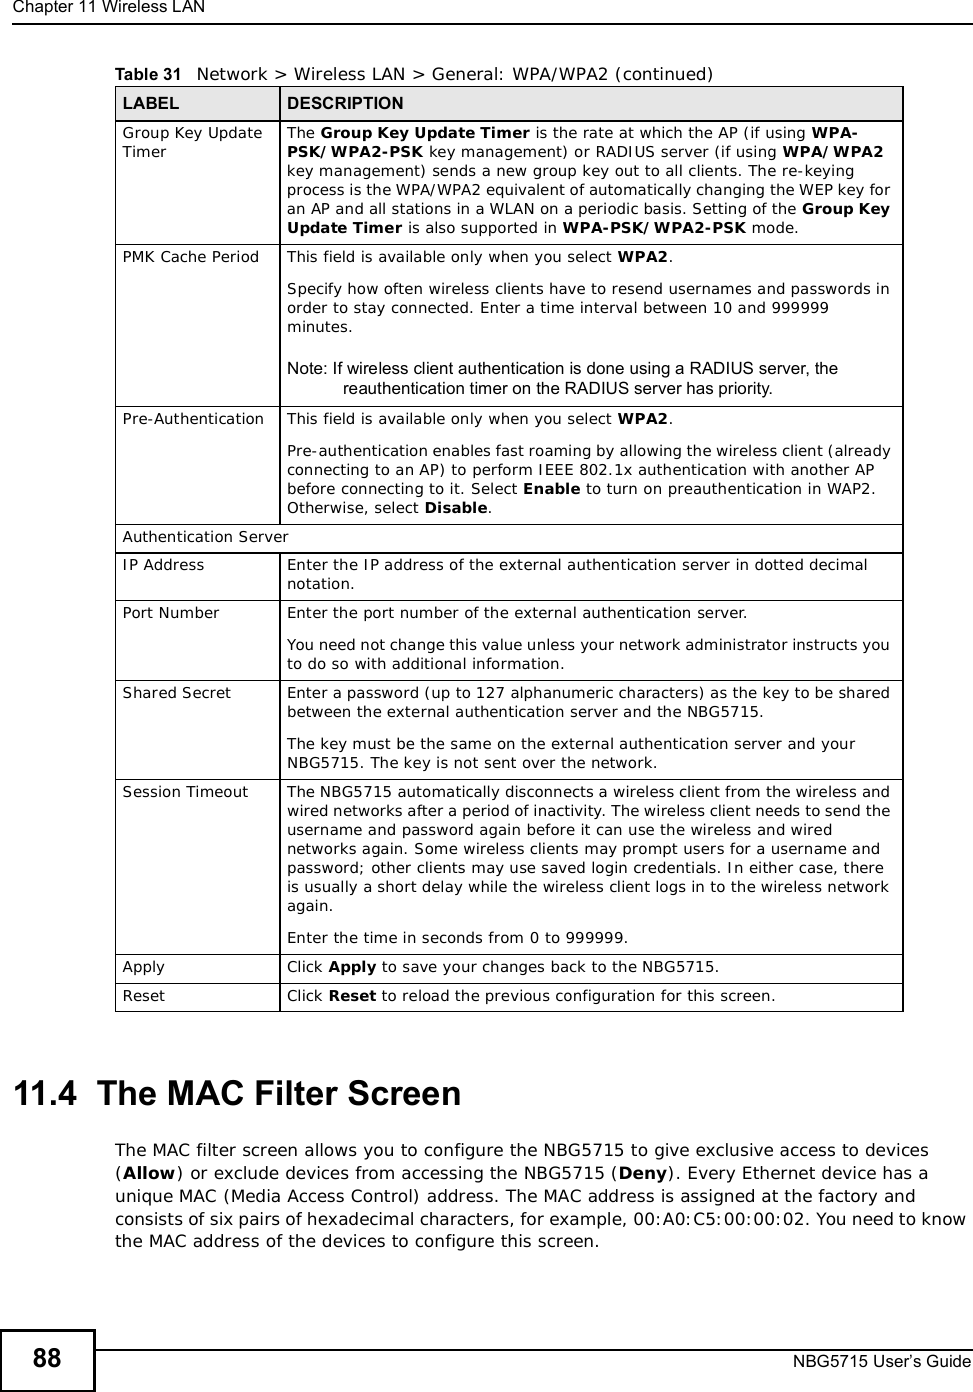 Chapter 11Wireless LANNBG5715 User’s Guide8811.4  The MAC Filter ScreenThe MAC filter screen allows you to configure the NBG5715 to give exclusive access to devices (Allow) or exclude devices from accessing the NBG5715 (Deny). Every Ethernet device has a unique MAC (Media Access Control) address. The MAC address is assigned at the factory and consists of six pairs of hexadecimal characters, for example, 00:A0:C5:00:00:02. You need to know the MAC address of the devices to configure this screen.Group Key Update Timer The Group Key Update Timer is the rate at which the AP (if using WPA-PSK/WPA2-PSK key management) or RADIUSserver (if using WPA/WPA2key management) sends a new group key out to all clients. The re-keying process is the WPA/WPA2 equivalent of automatically changing the WEP key for an AP and all stations in a WLAN on a periodic basis. Setting of the Group Key Update Timer is also supported in WPA-PSK/WPA2-PSK mode. PMK Cache Period  This field is available only when you select WPA2.Specify how often wireless clients have to resend usernames and passwords in order to stay connected. Enter a time interval between 10 and 999999 minutes. Note: If wireless client authentication is done using a RADIUS server, the reauthentication timer on the RADIUS server has priority.Pre-Authentication  This field is available only when you select WPA2.Pre-authentication enables fast roaming by allowing the wireless client (already connecting to an AP) to perform IEEE 802.1x authentication with another AP before connecting to it. Select Enable to turn on preauthentication in WAP2. Otherwise, select Disable.Authentication ServerIP Address Enter the IP address of the external authentication server in dotted decimal notation.Port Number Enter the port number of the external authentication server.  You need not change this value unless your network administrator instructs you to do so with additional information. Shared Secret Enter a password (up to 127 alphanumeric characters) as the key to be shared between the external authentication server and the NBG5715.The key must be the same on the external authentication server and your NBG5715. The key is not sent over the network. Session Timeout The NBG5715 automatically disconnects a wireless client from the wireless and wired networks after a period of inactivity. The wireless client needs to send the username and password again before it can use the wireless and wired networks again. Some wireless clients may prompt users for a username and password; other clients may use saved login credentials. In either case, there is usually a short delay while the wireless client logs in to the wireless network again.Enter the time in seconds from 0 to 999999.Apply Click Apply to save your changes back to the NBG5715.Reset Click Reset to reload the previous configuration for this screen.Table 31   Network &gt; Wireless LAN &gt; General: WPA/WPA2 (continued)LABEL DESCRIPTION